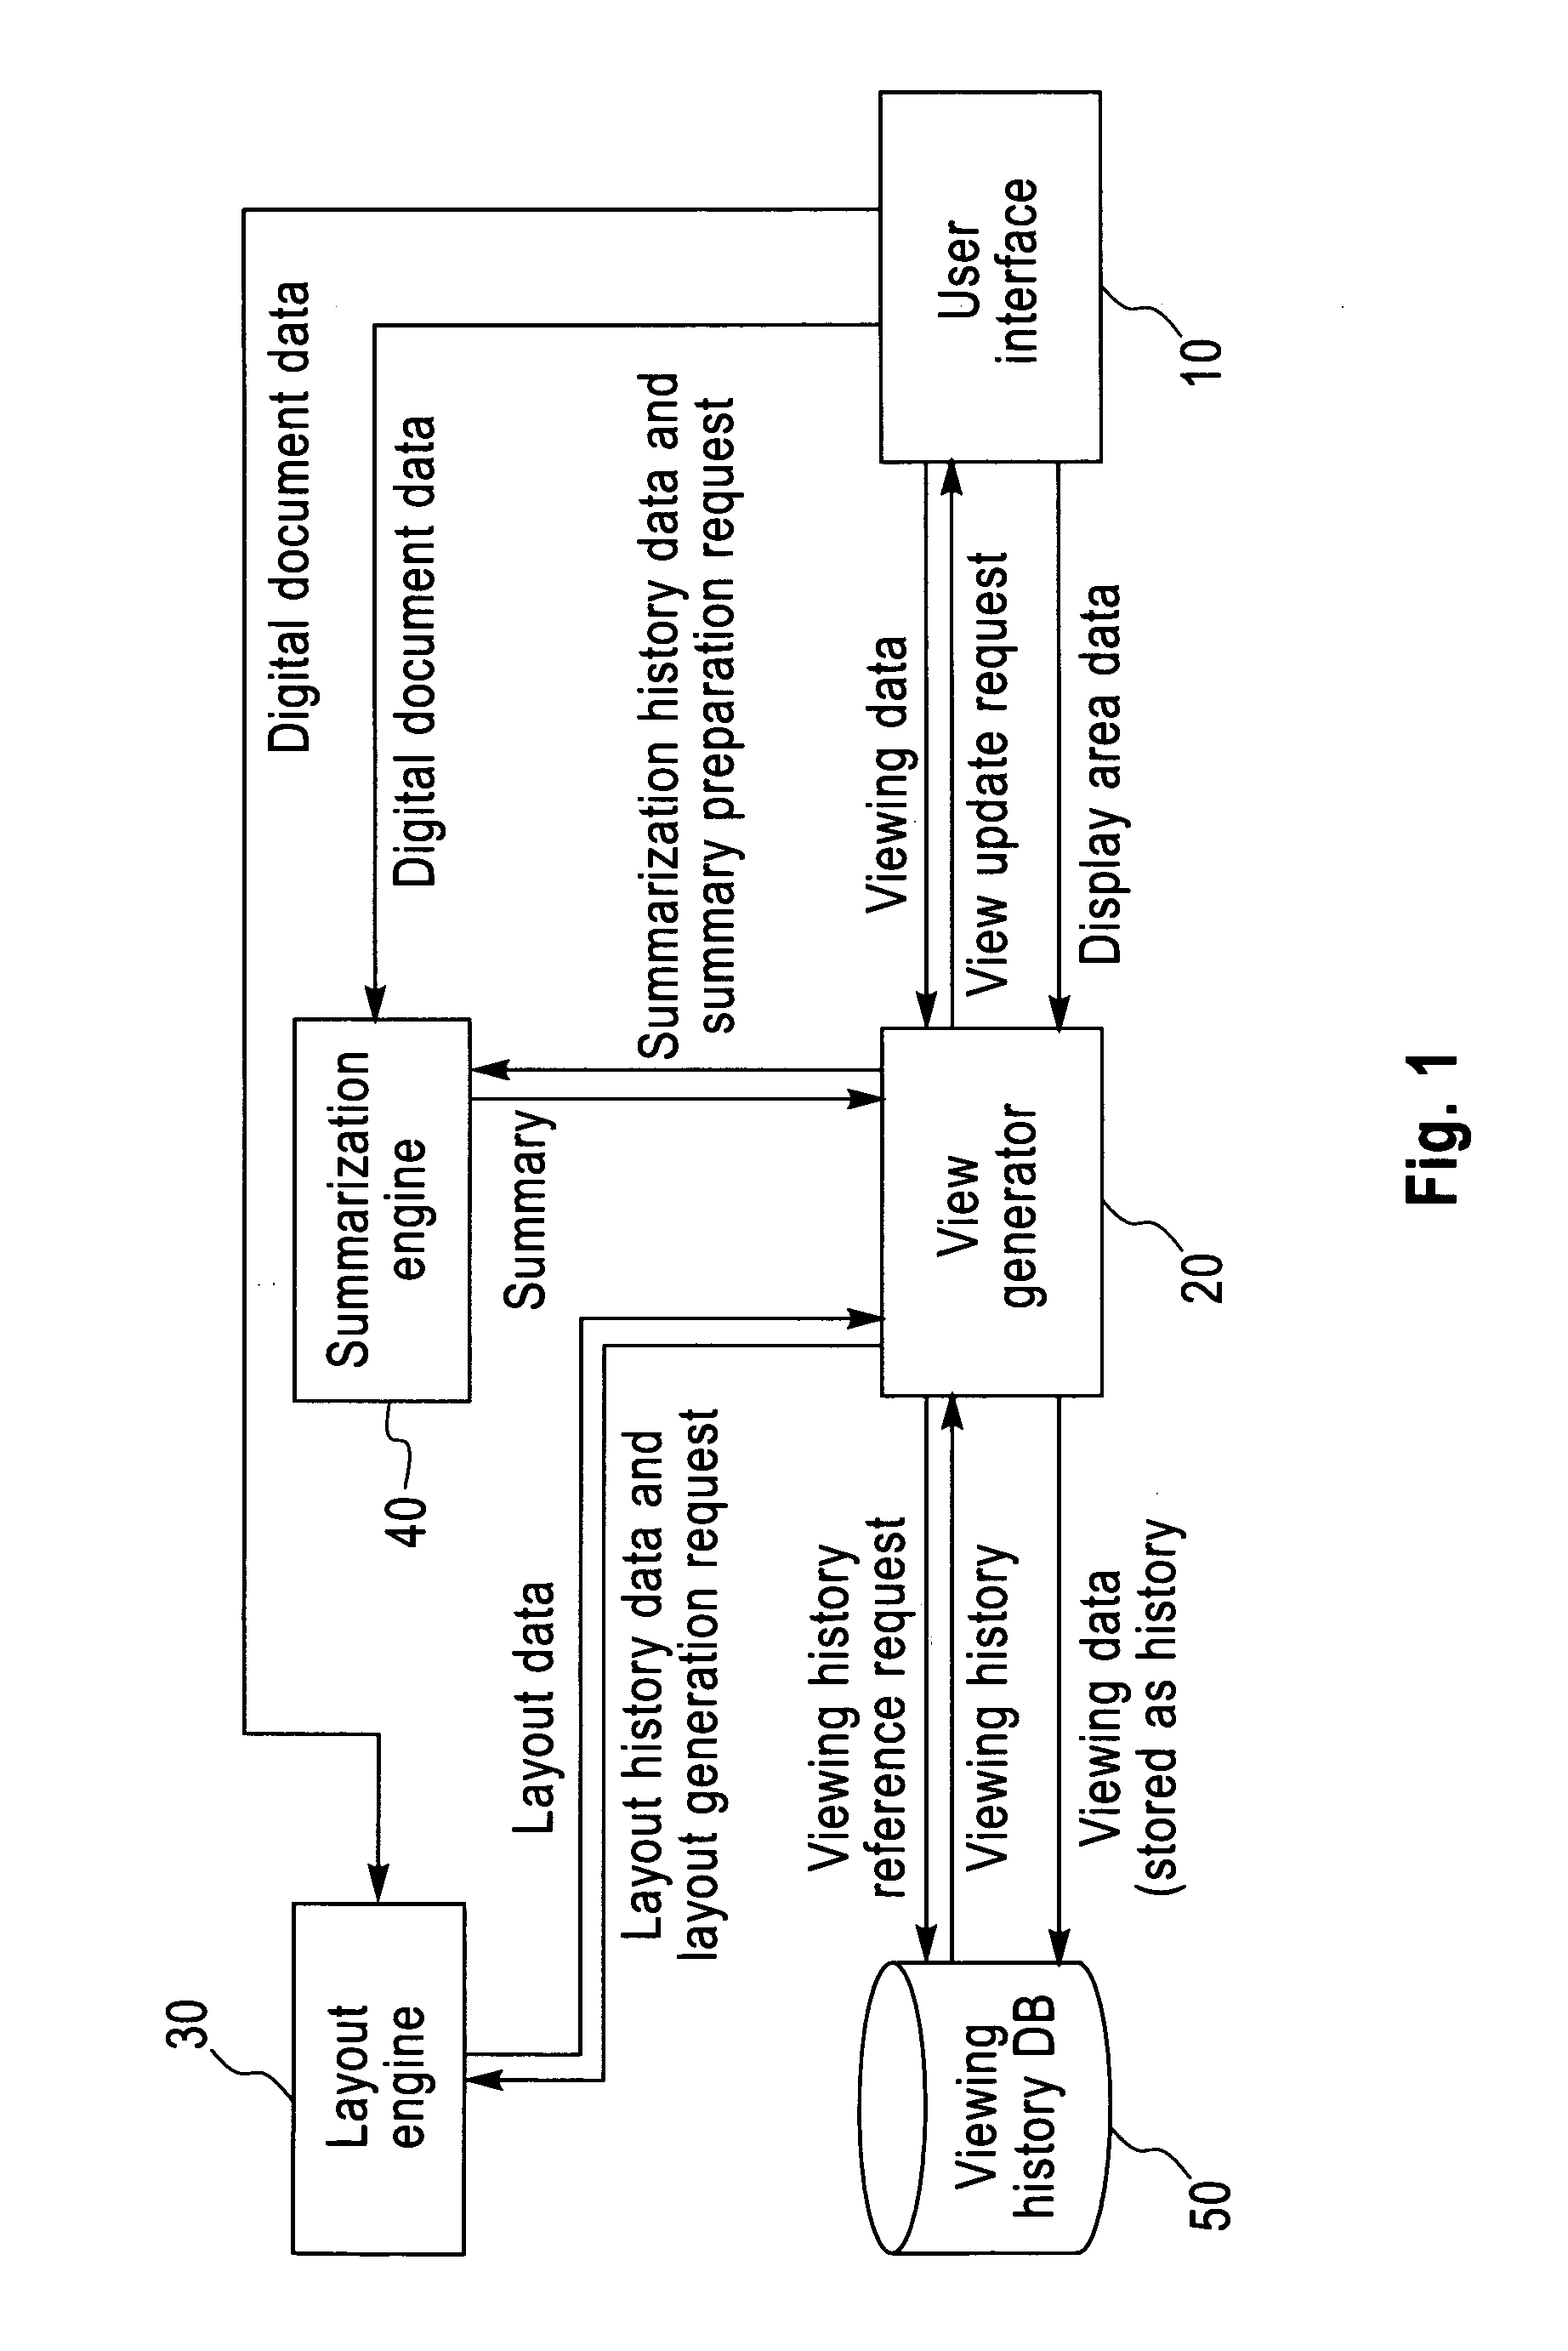 Digital document browsing system and method thereof